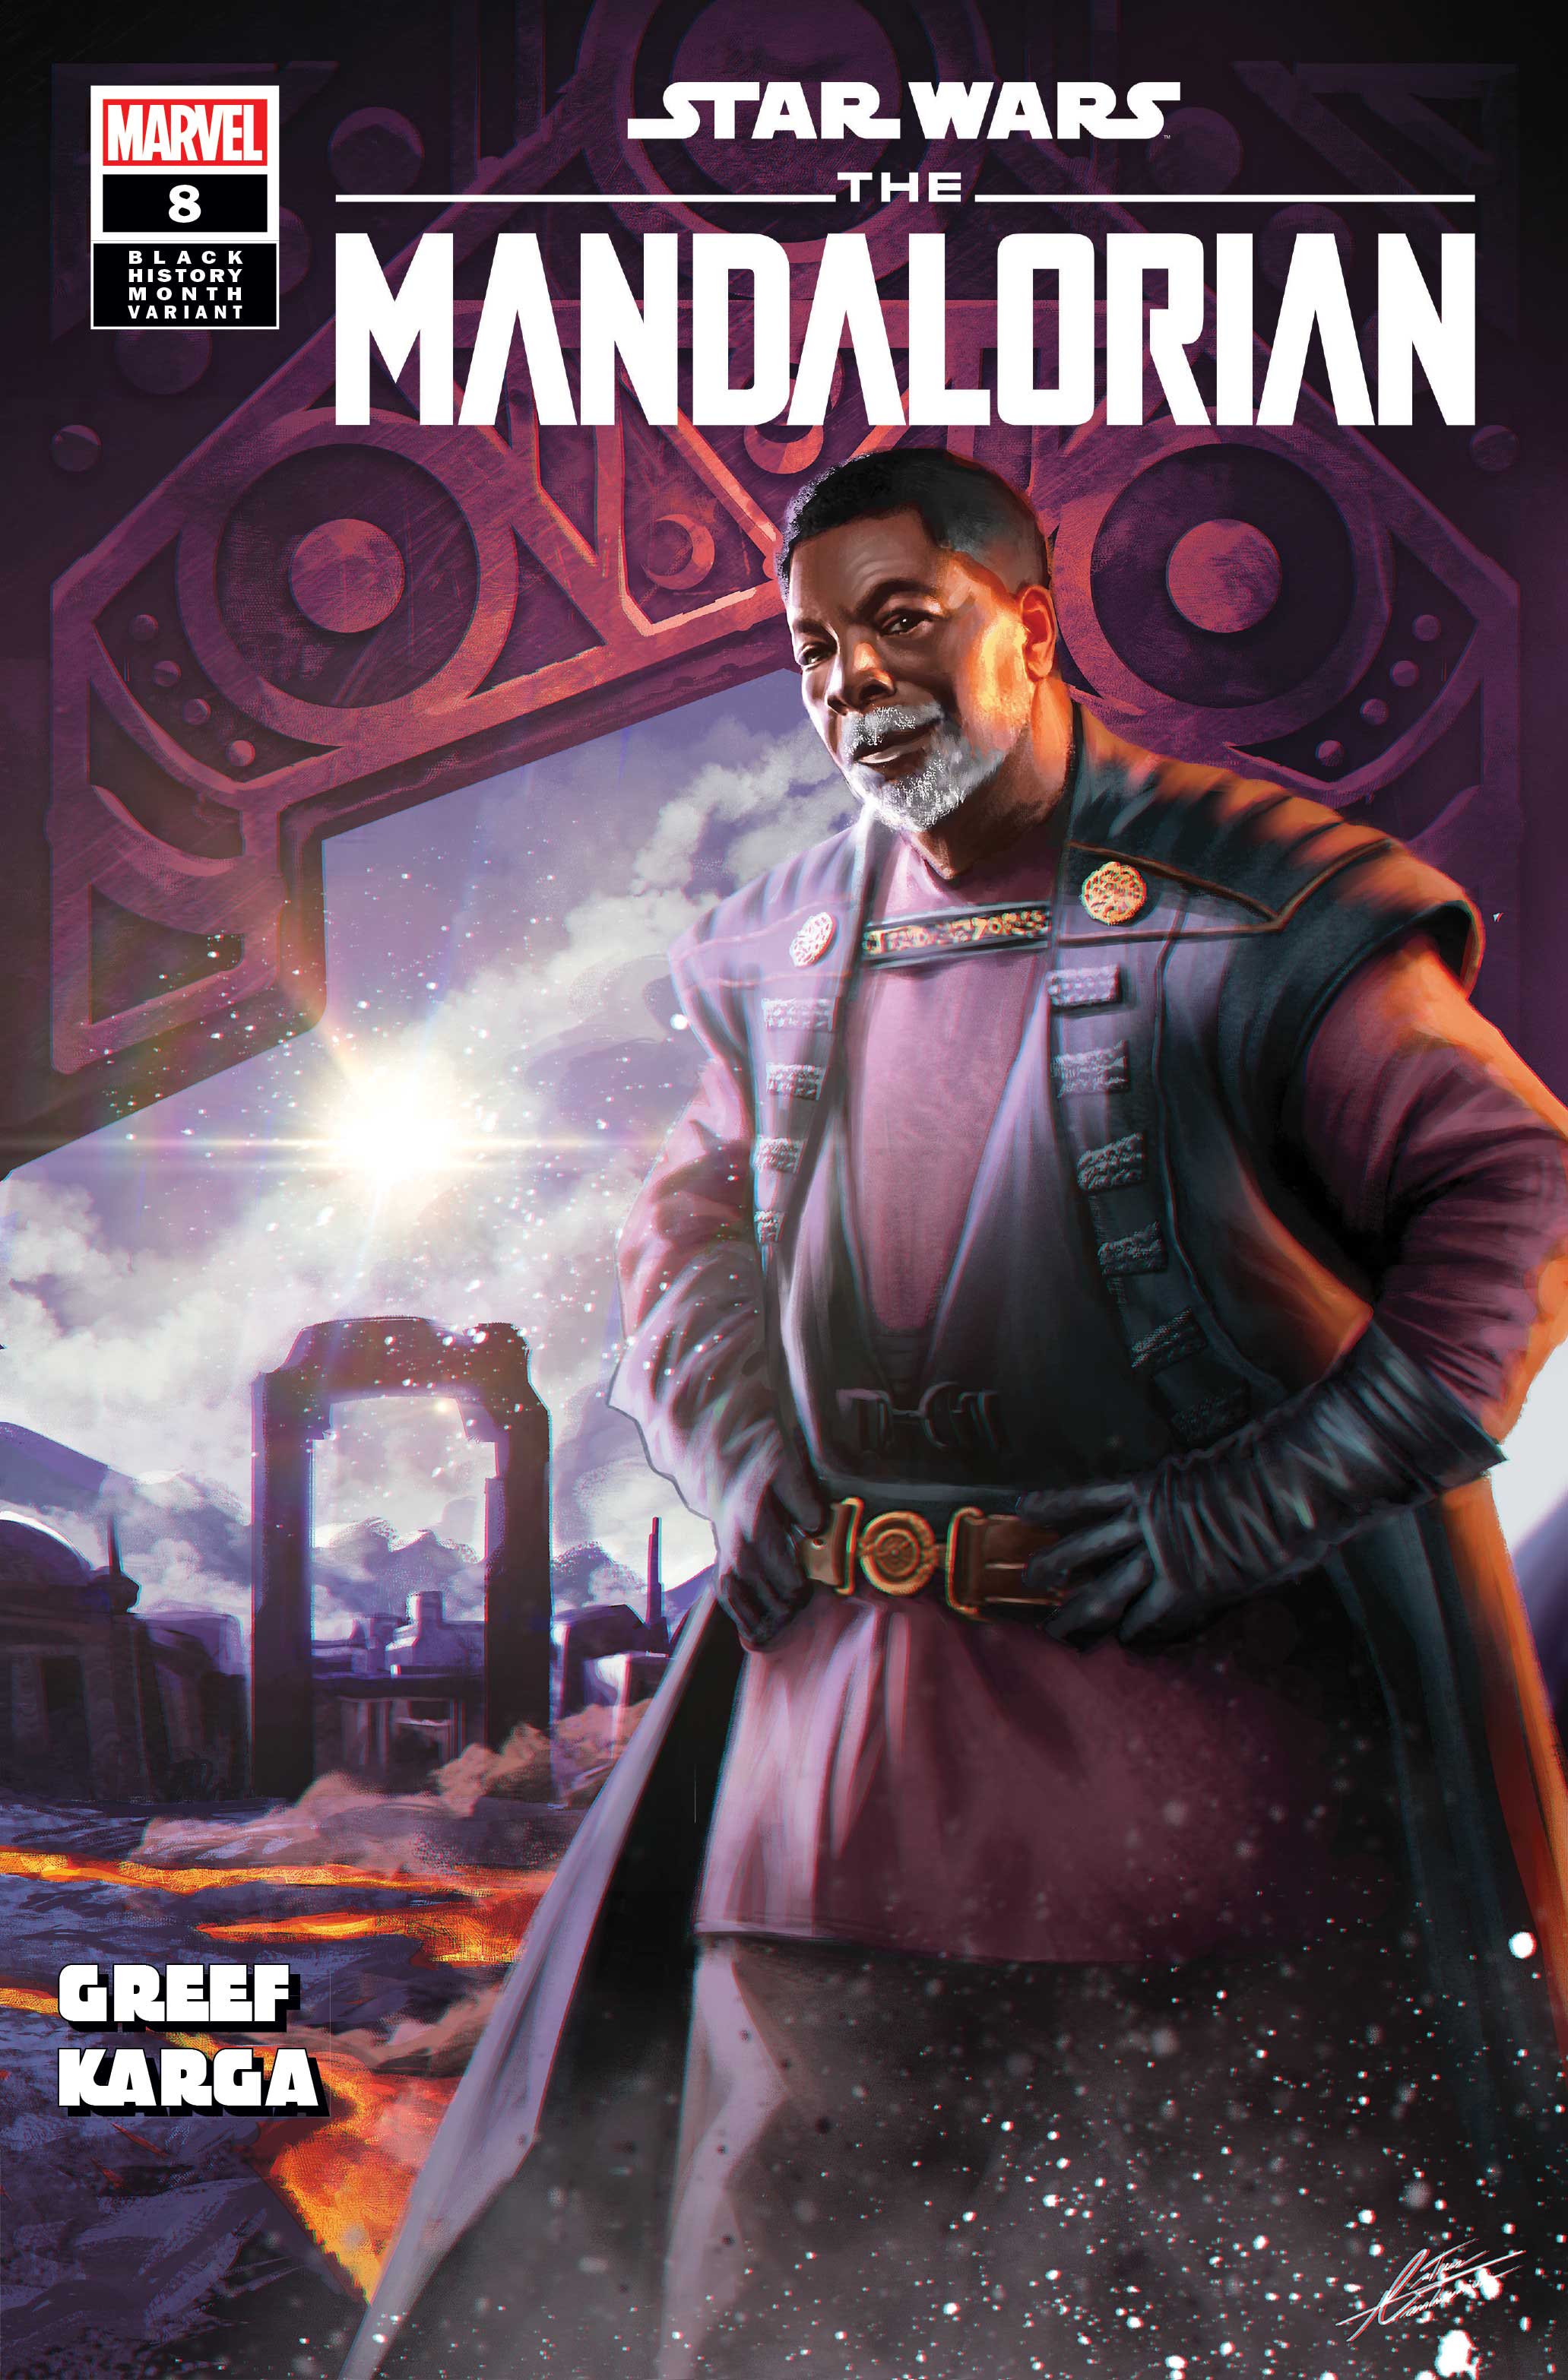 Comic cover for the Mandalorian featuring Greef Karga with his hands on his hips